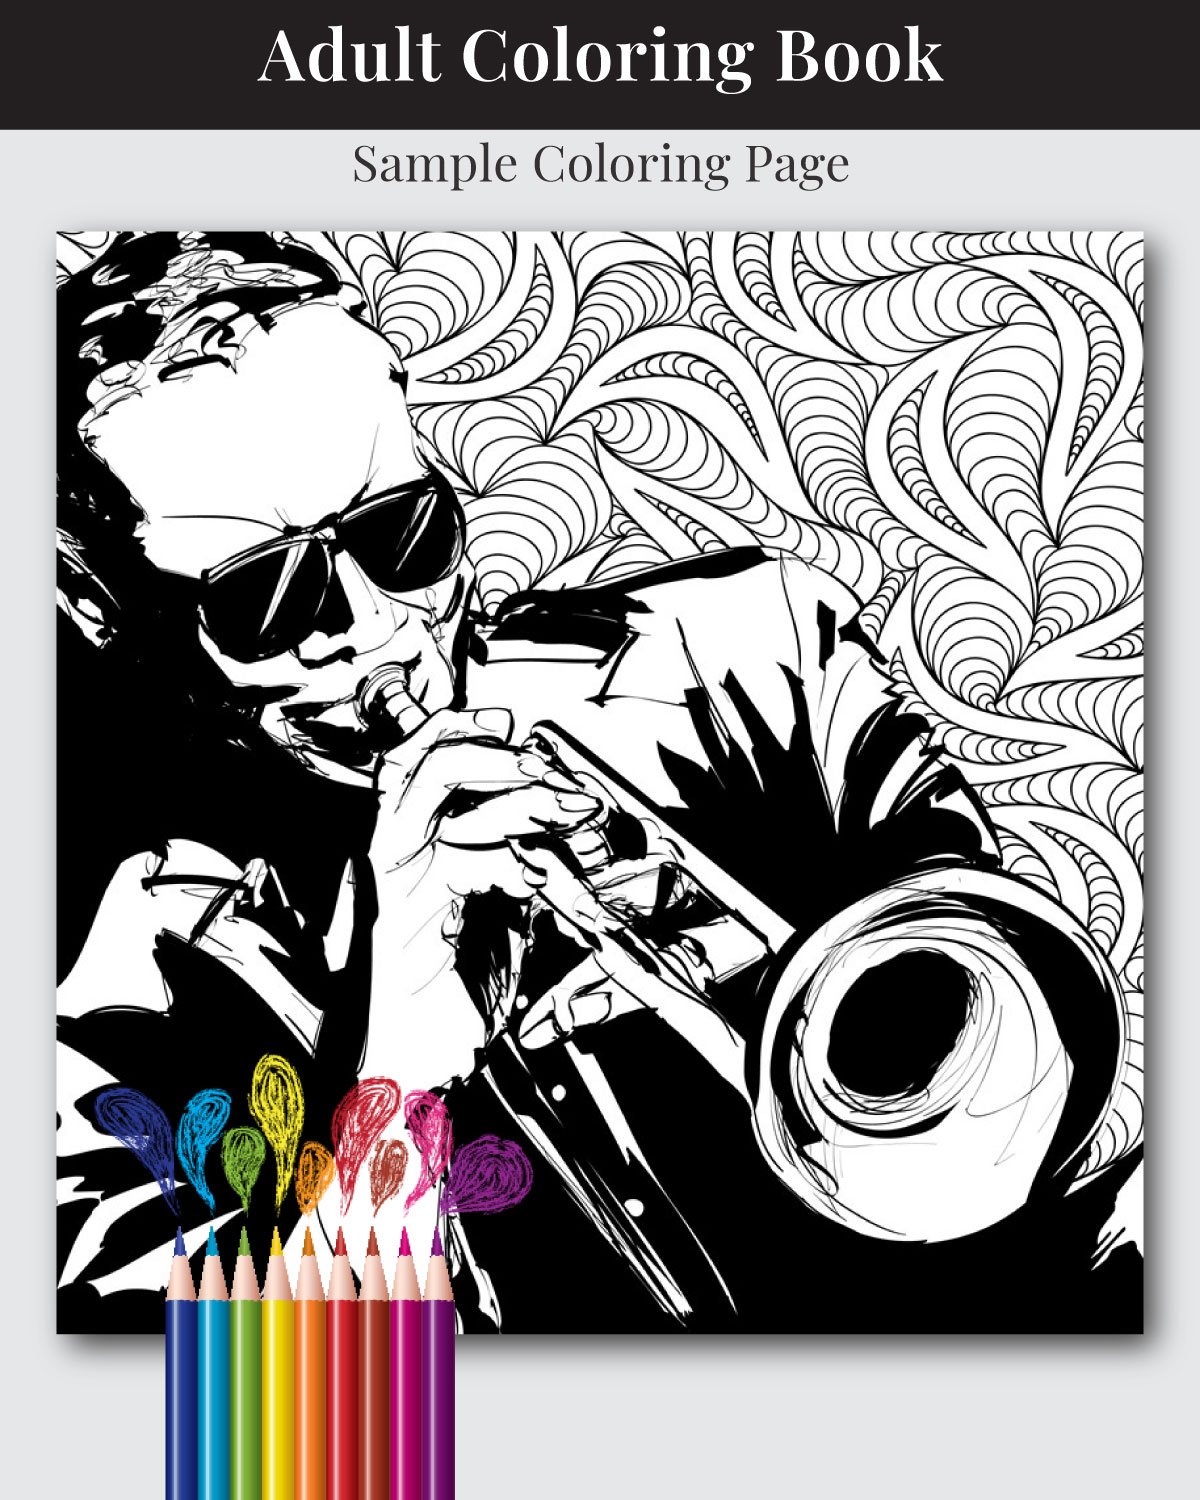 Jazz-Experience-Adult-Coloring-Book-Sample-03